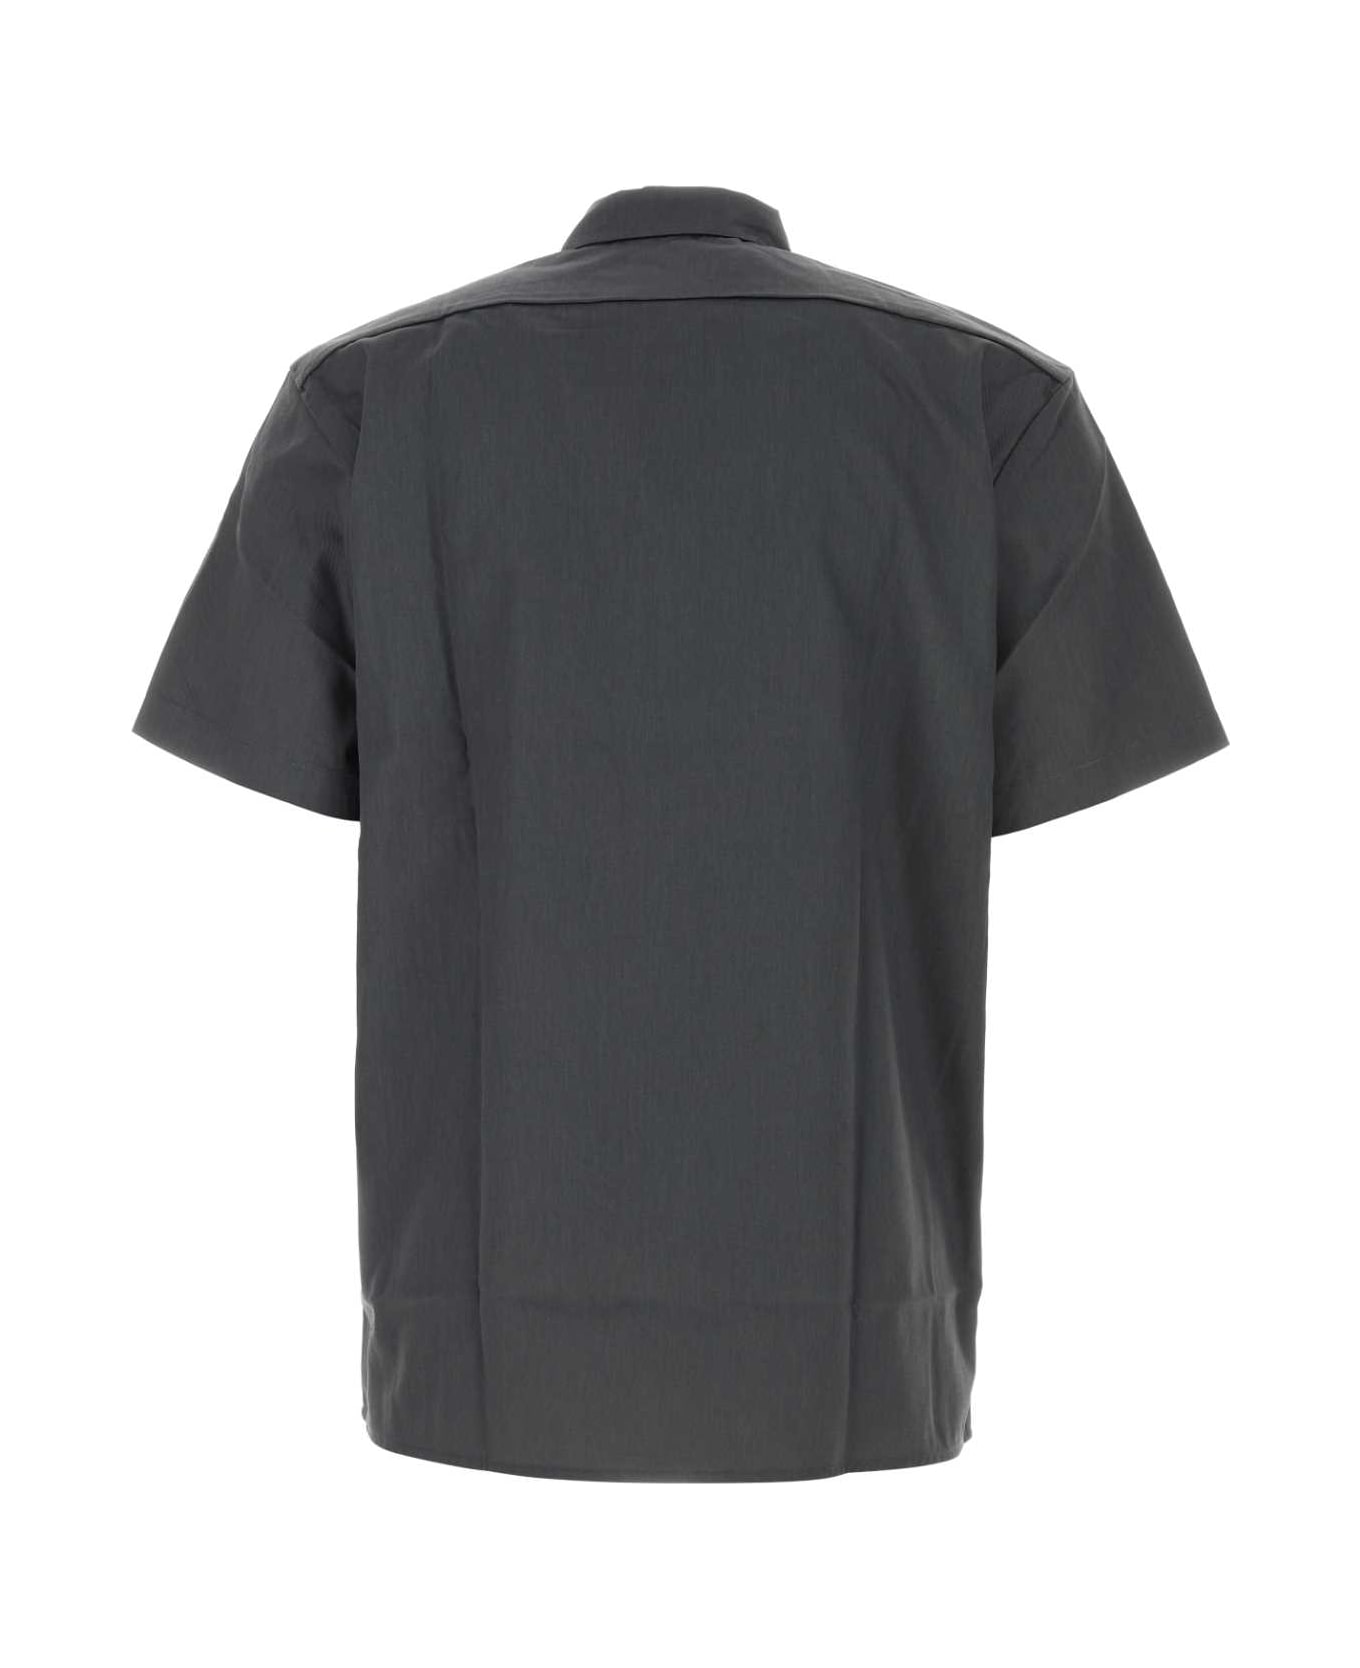 Dickies Graphite Polyester Blend Shirt - CHARCOALGREY